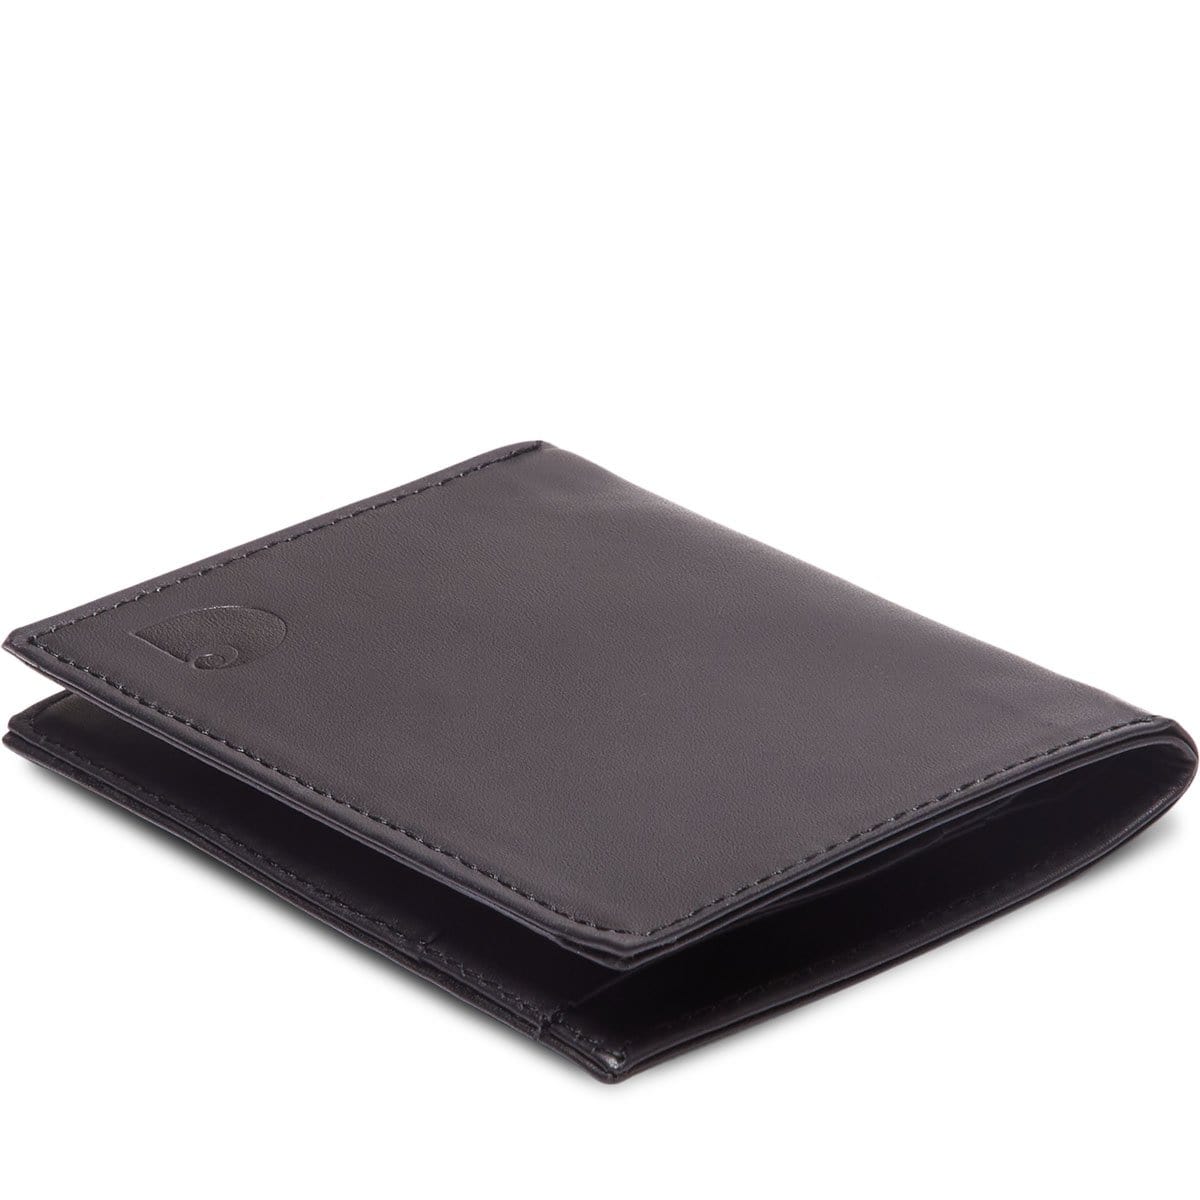 Carhartt W.I.P. Wallets & Cases BLACK / OS LEATHER FOLD WALLET